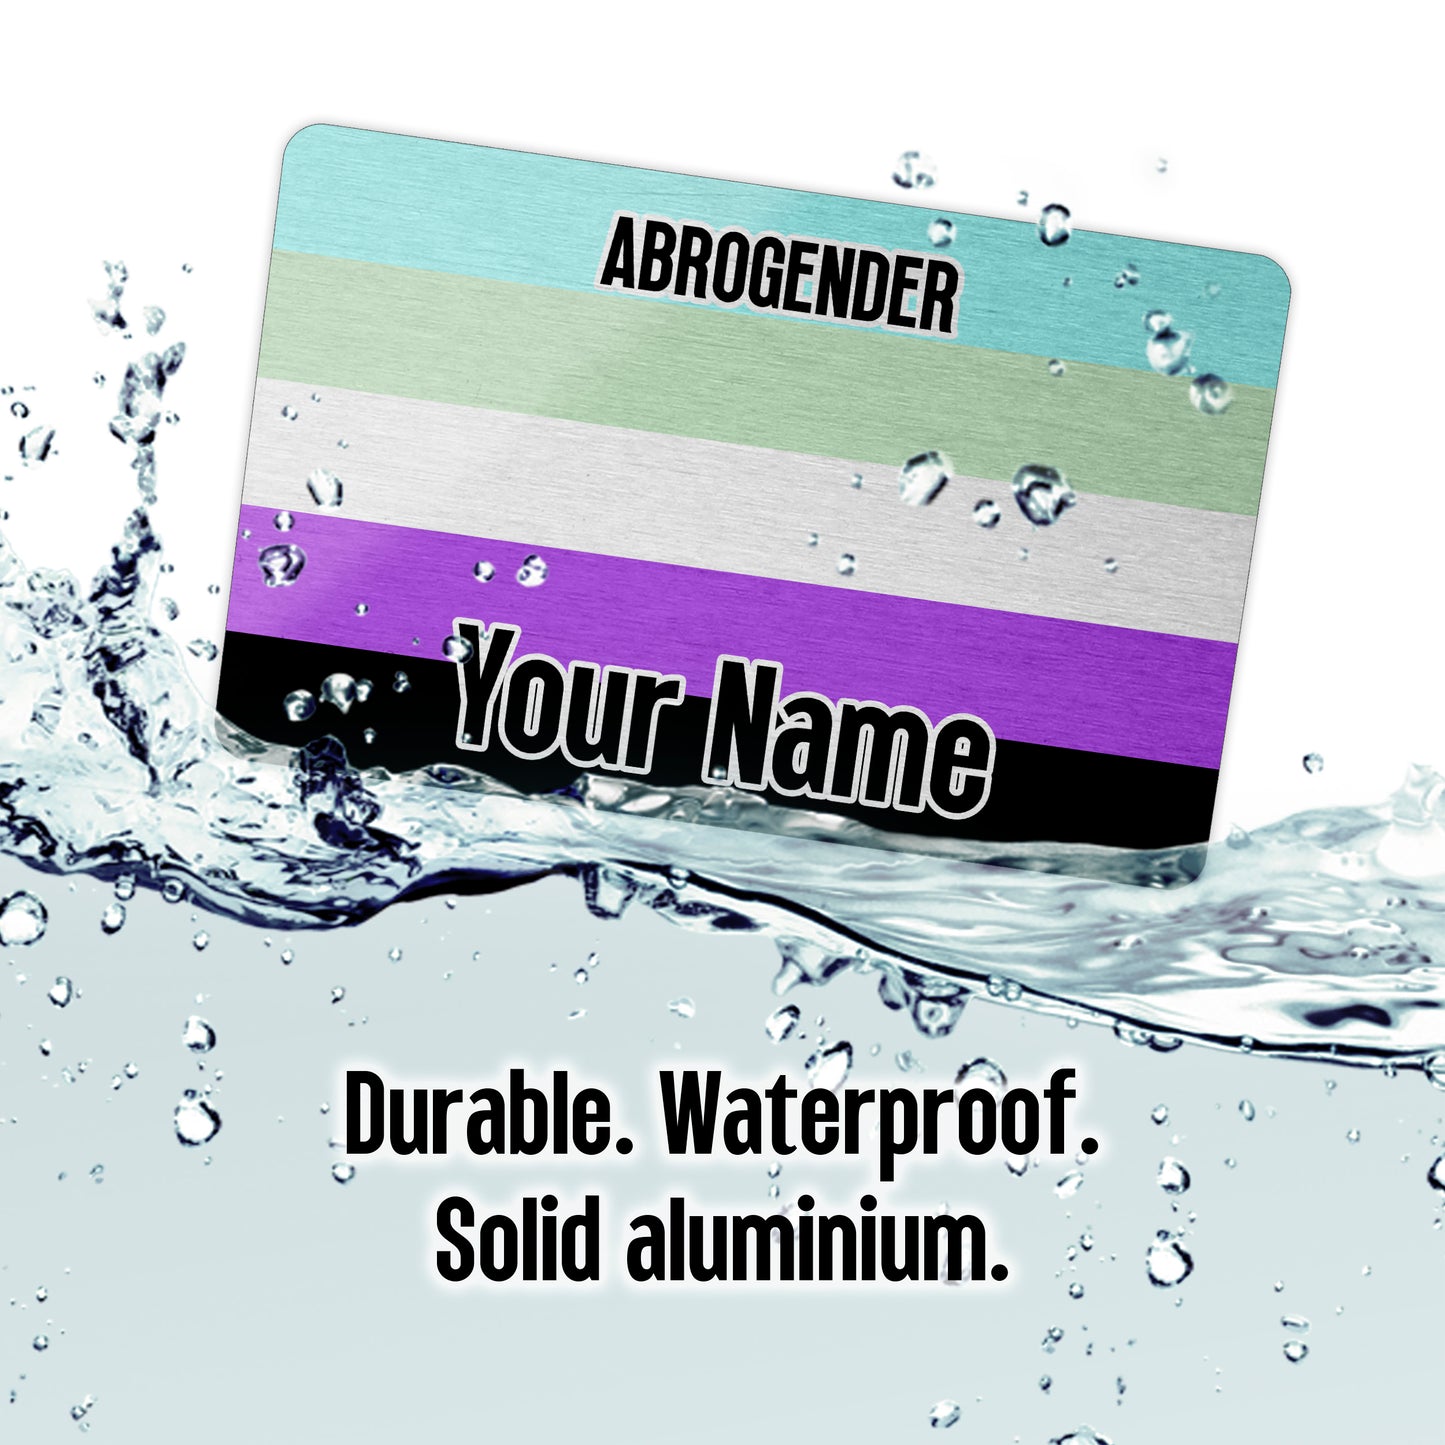 Aluminium metal wallet card personalised with your name and the abrogender pride flag